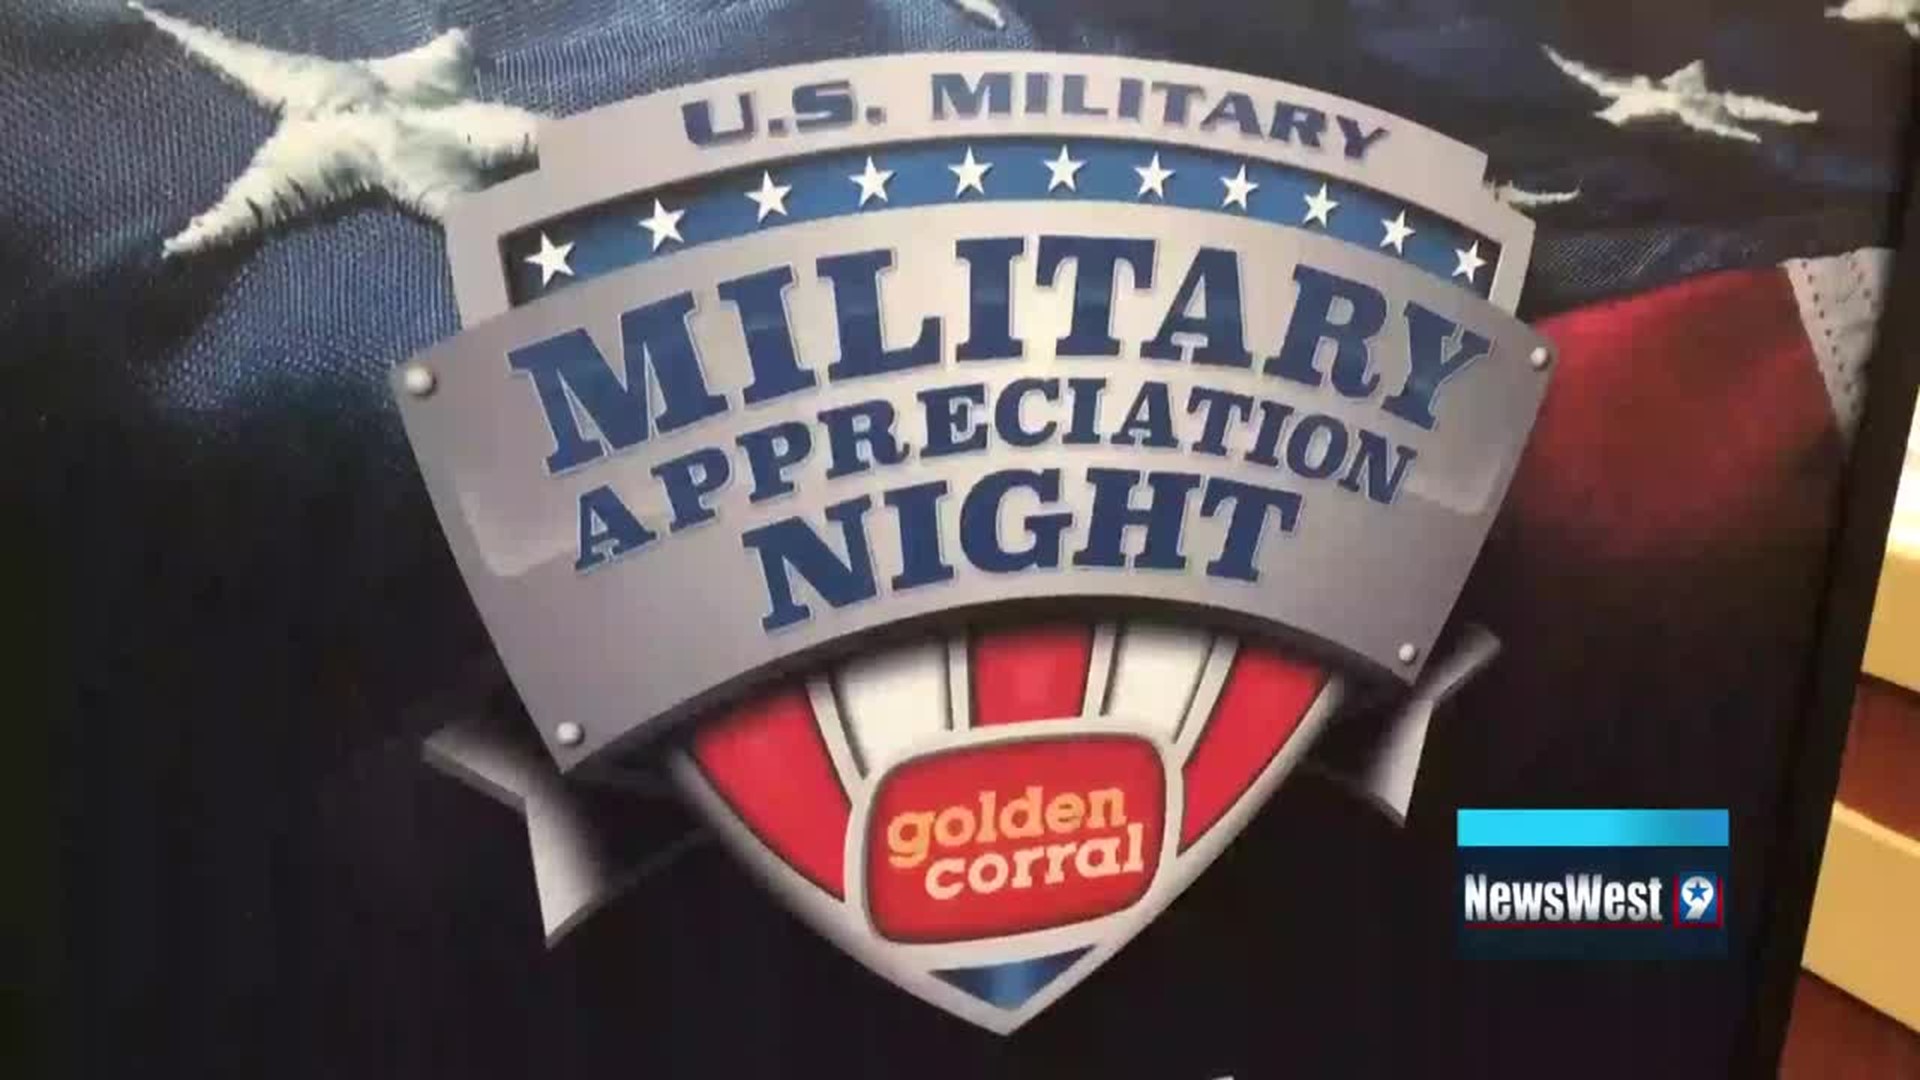 Golden Corral honors military members with free meal after Veteran’s